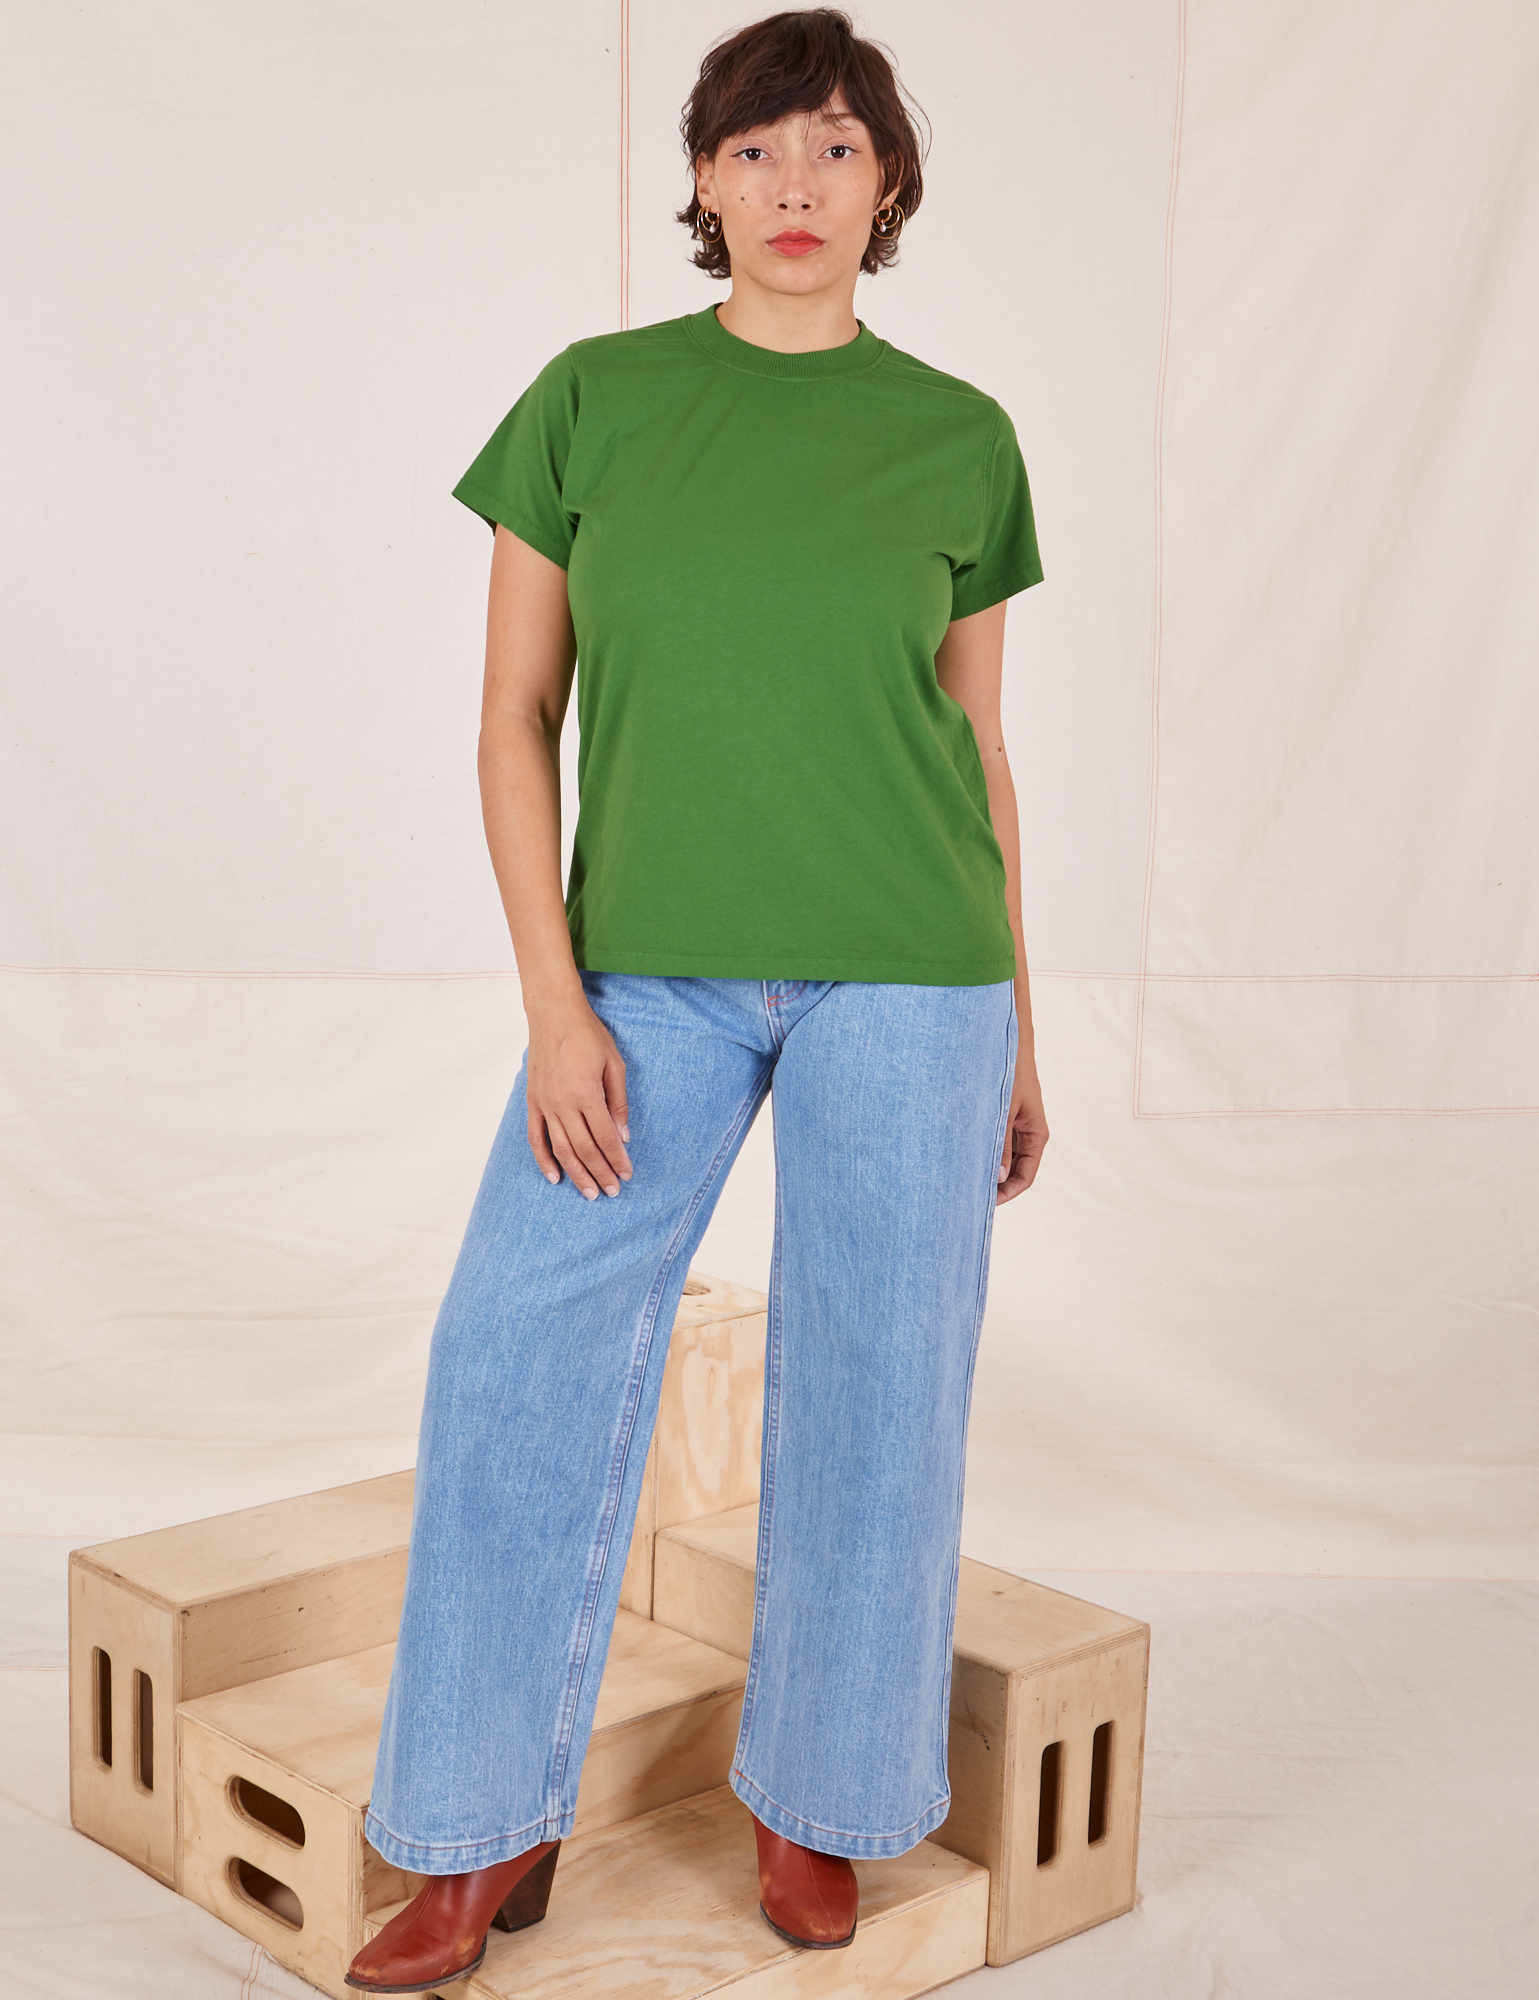 Tiara is wearing Organic Vintage Tee in Lawn Green and light wash Sailor Jeans